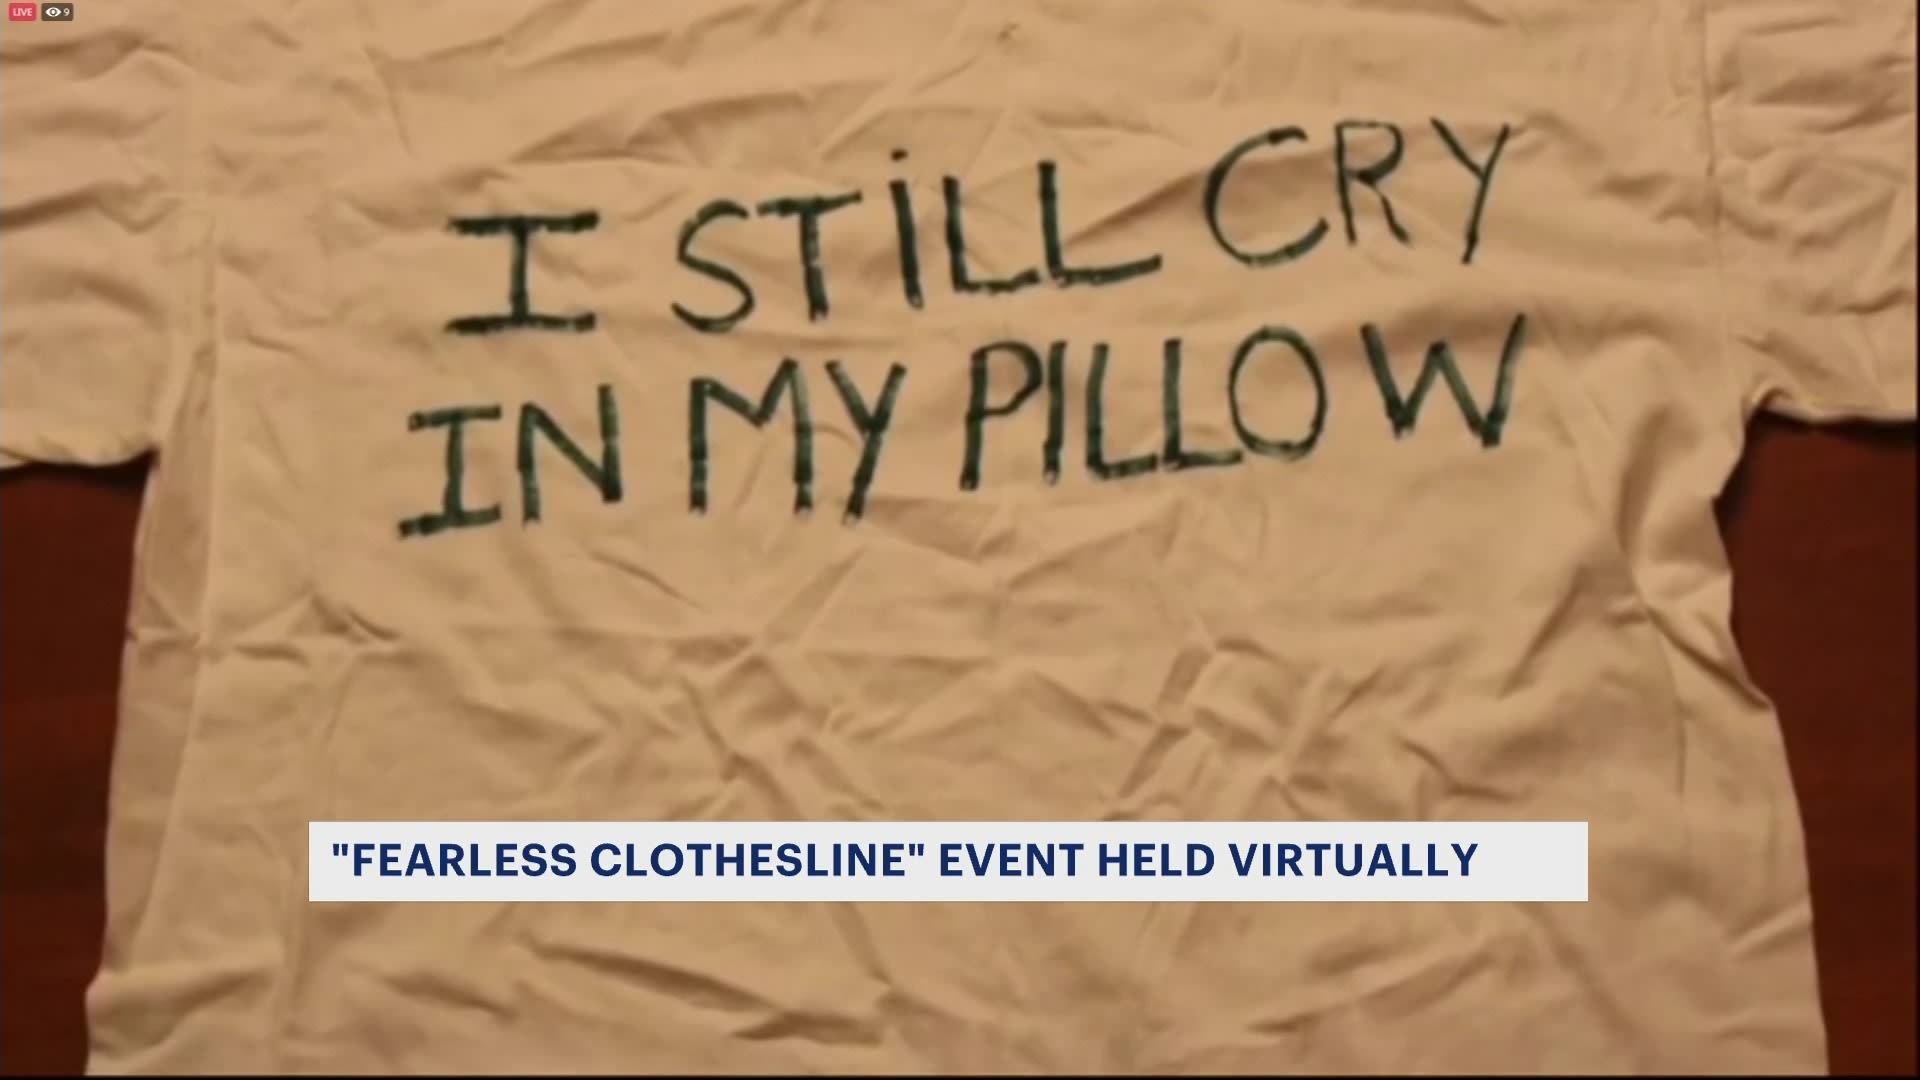 'Fearless Clothesline' event raises awareness of domestic violence